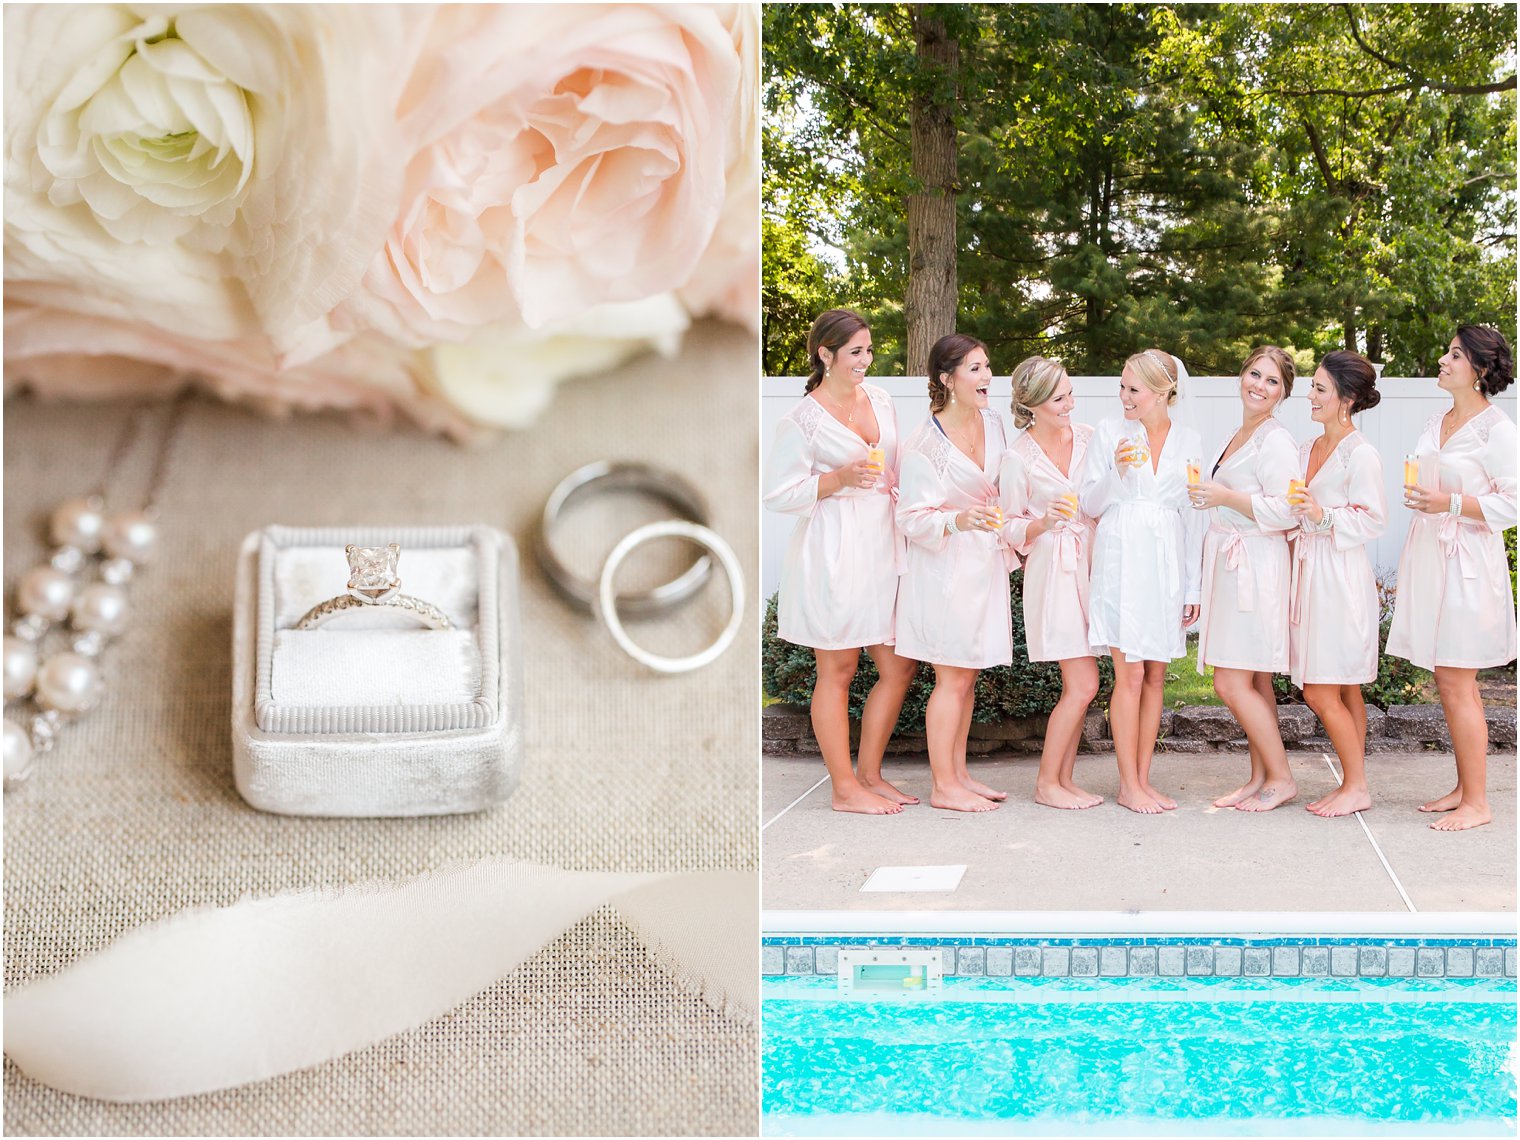 The Sunset Ballroom at Jack Baker's Lobster Shanty Wedding | Bridesmaids in pink robes